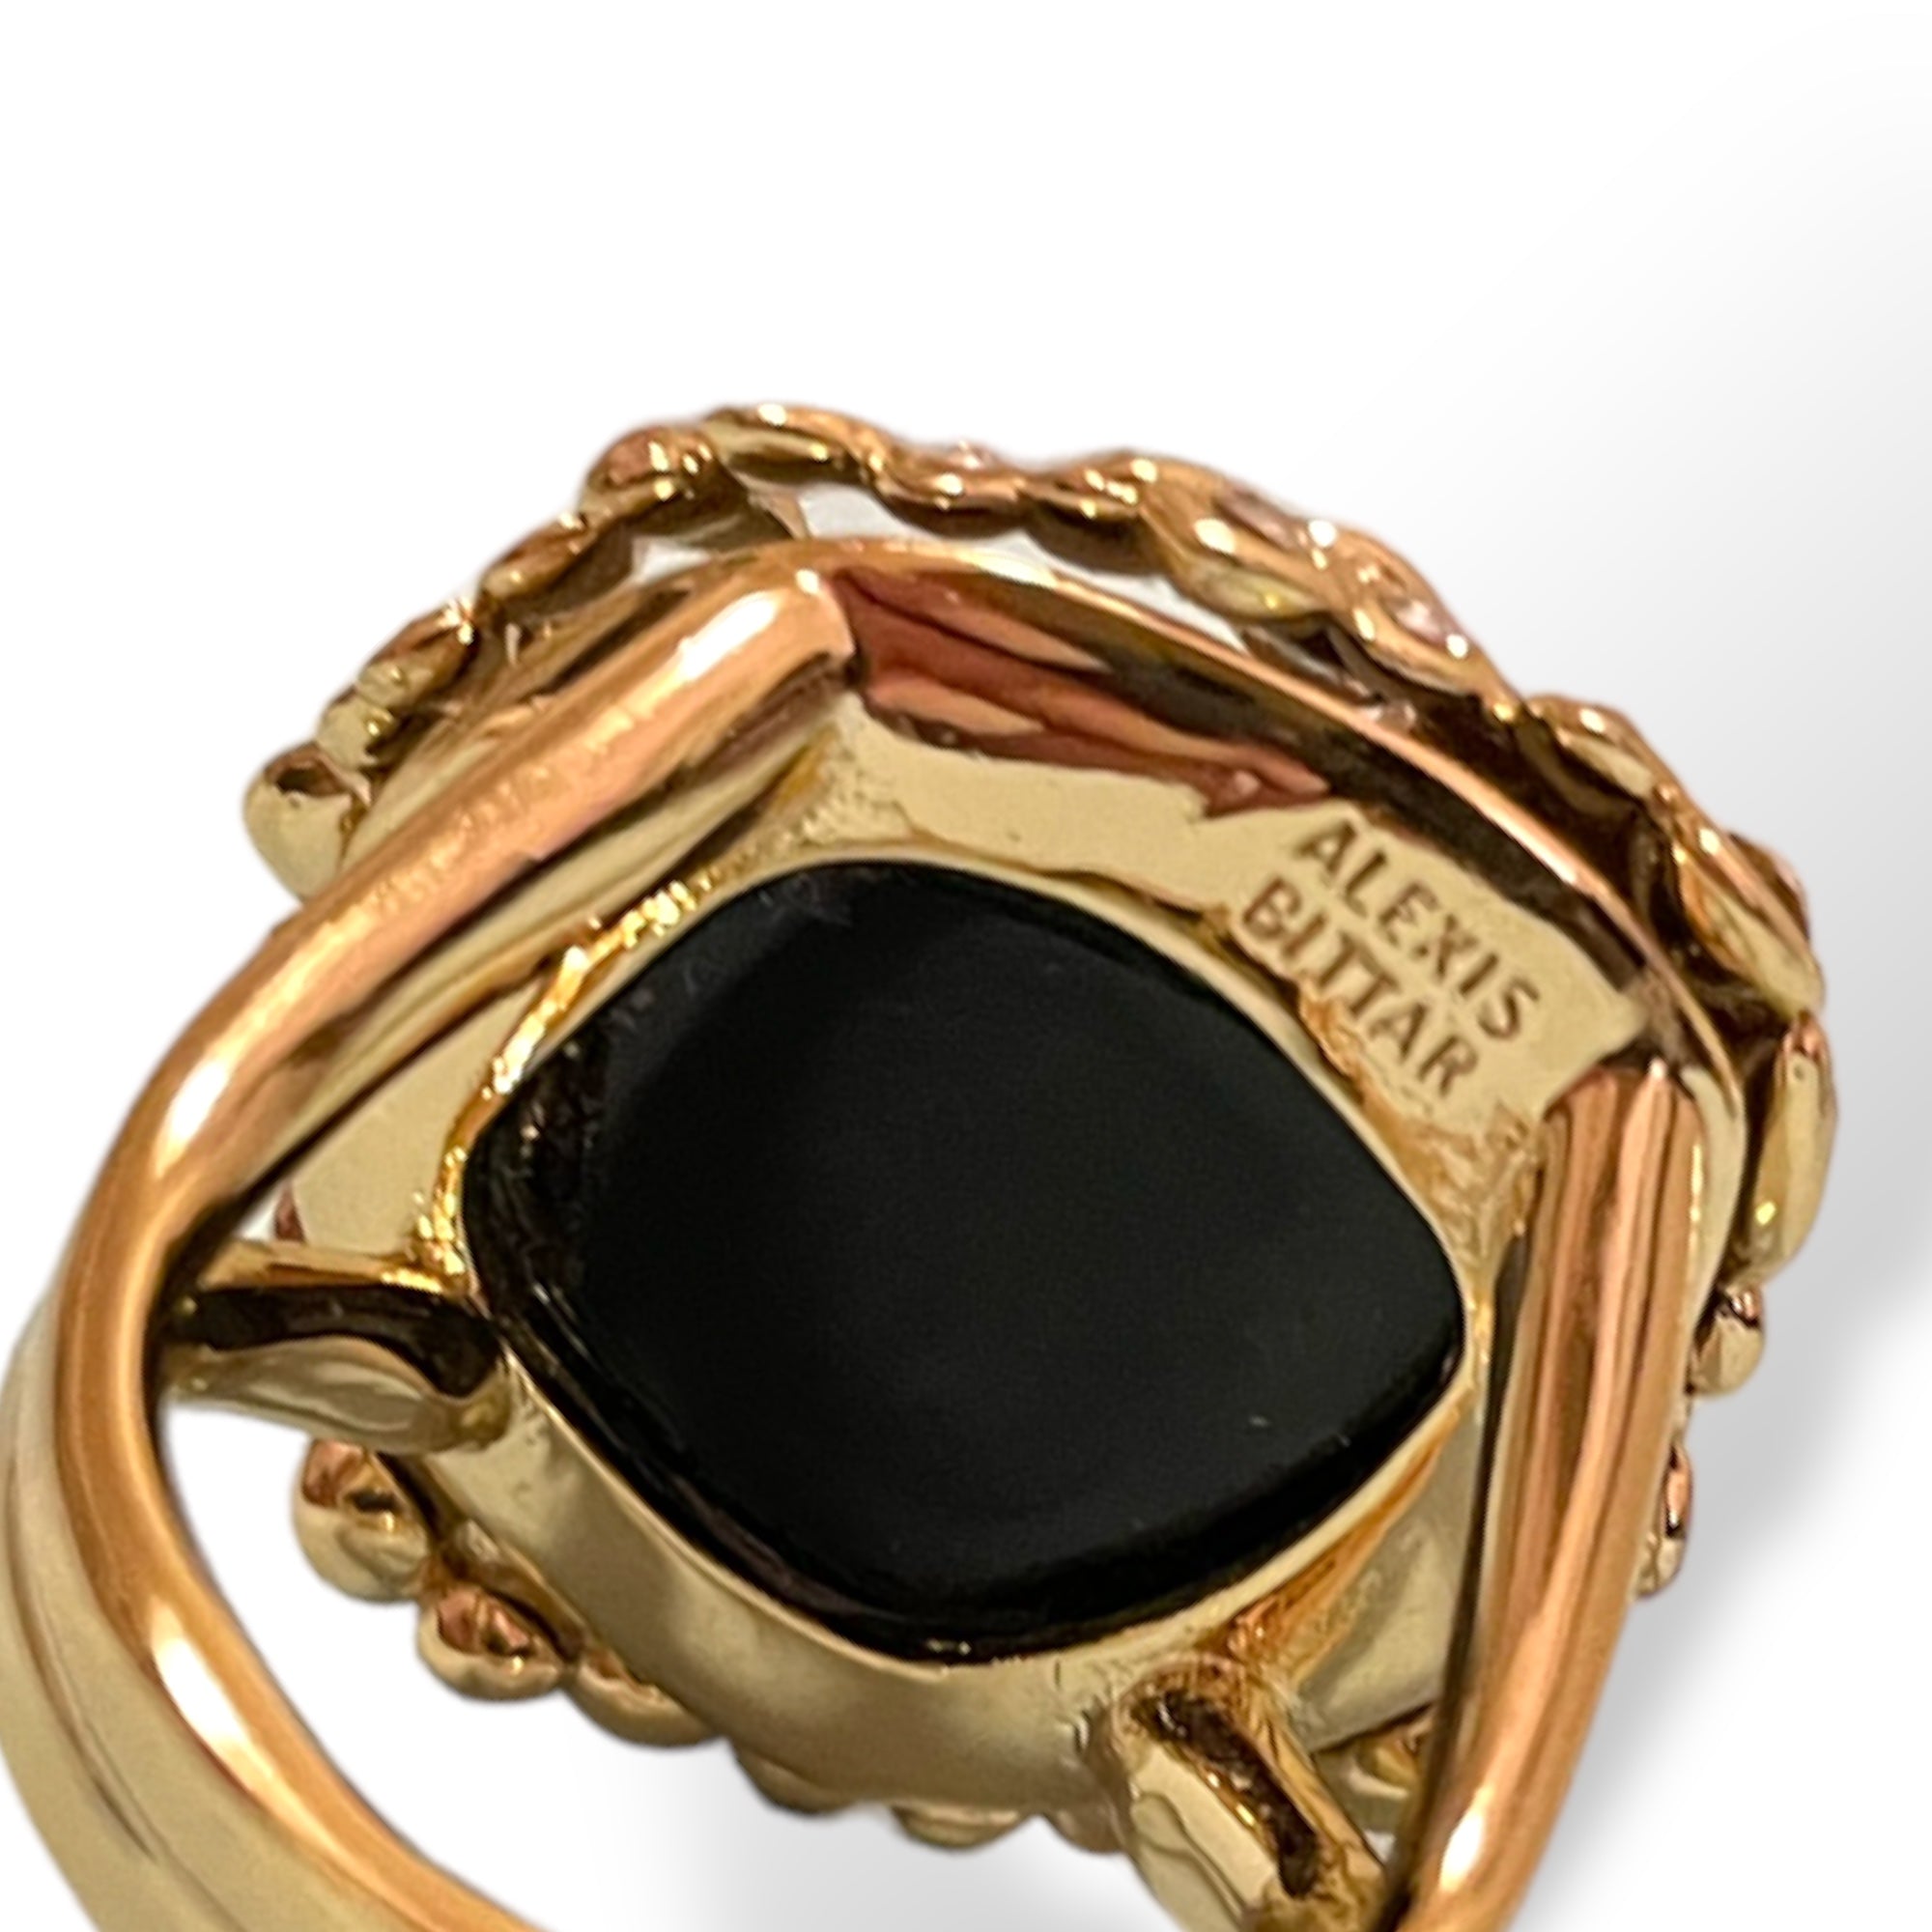 ALEXIS BITTAR 18k Gold Plated Ring with Hand Carved Lucite Center & Crystal Encrusted Accents